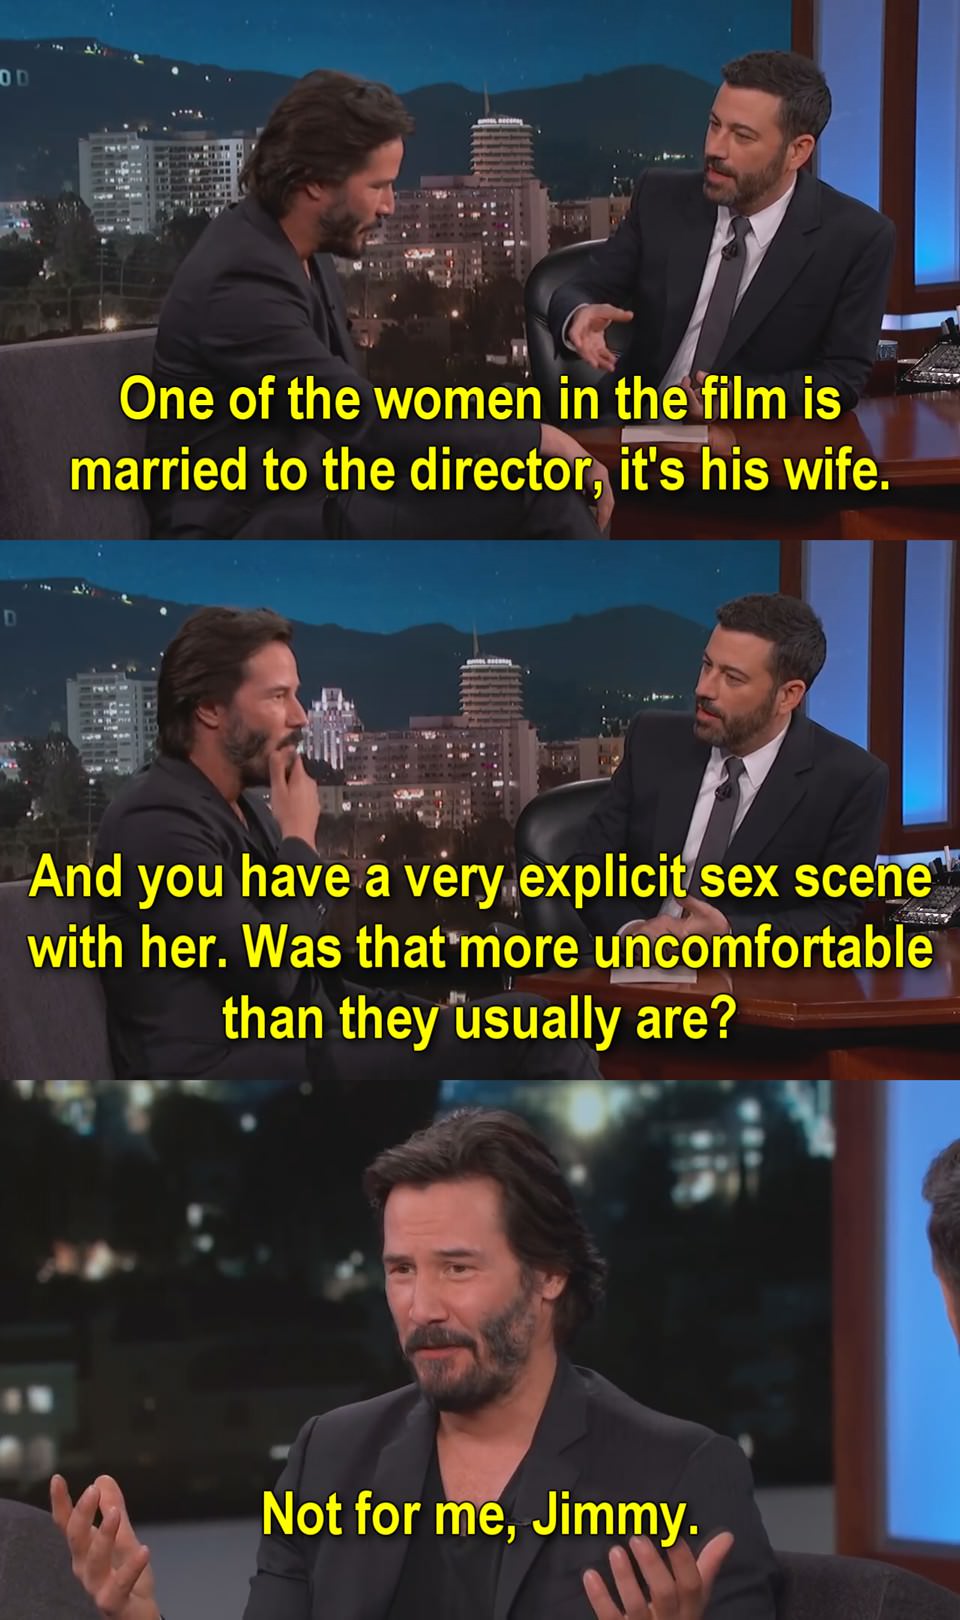 memes  - keanu reeves sex scene - One of the women in the film is married to the director, it's his wife. And you have a very explicit sex scene with her. Was that more uncomfortable than they usually are? Not for me, Jimmy.